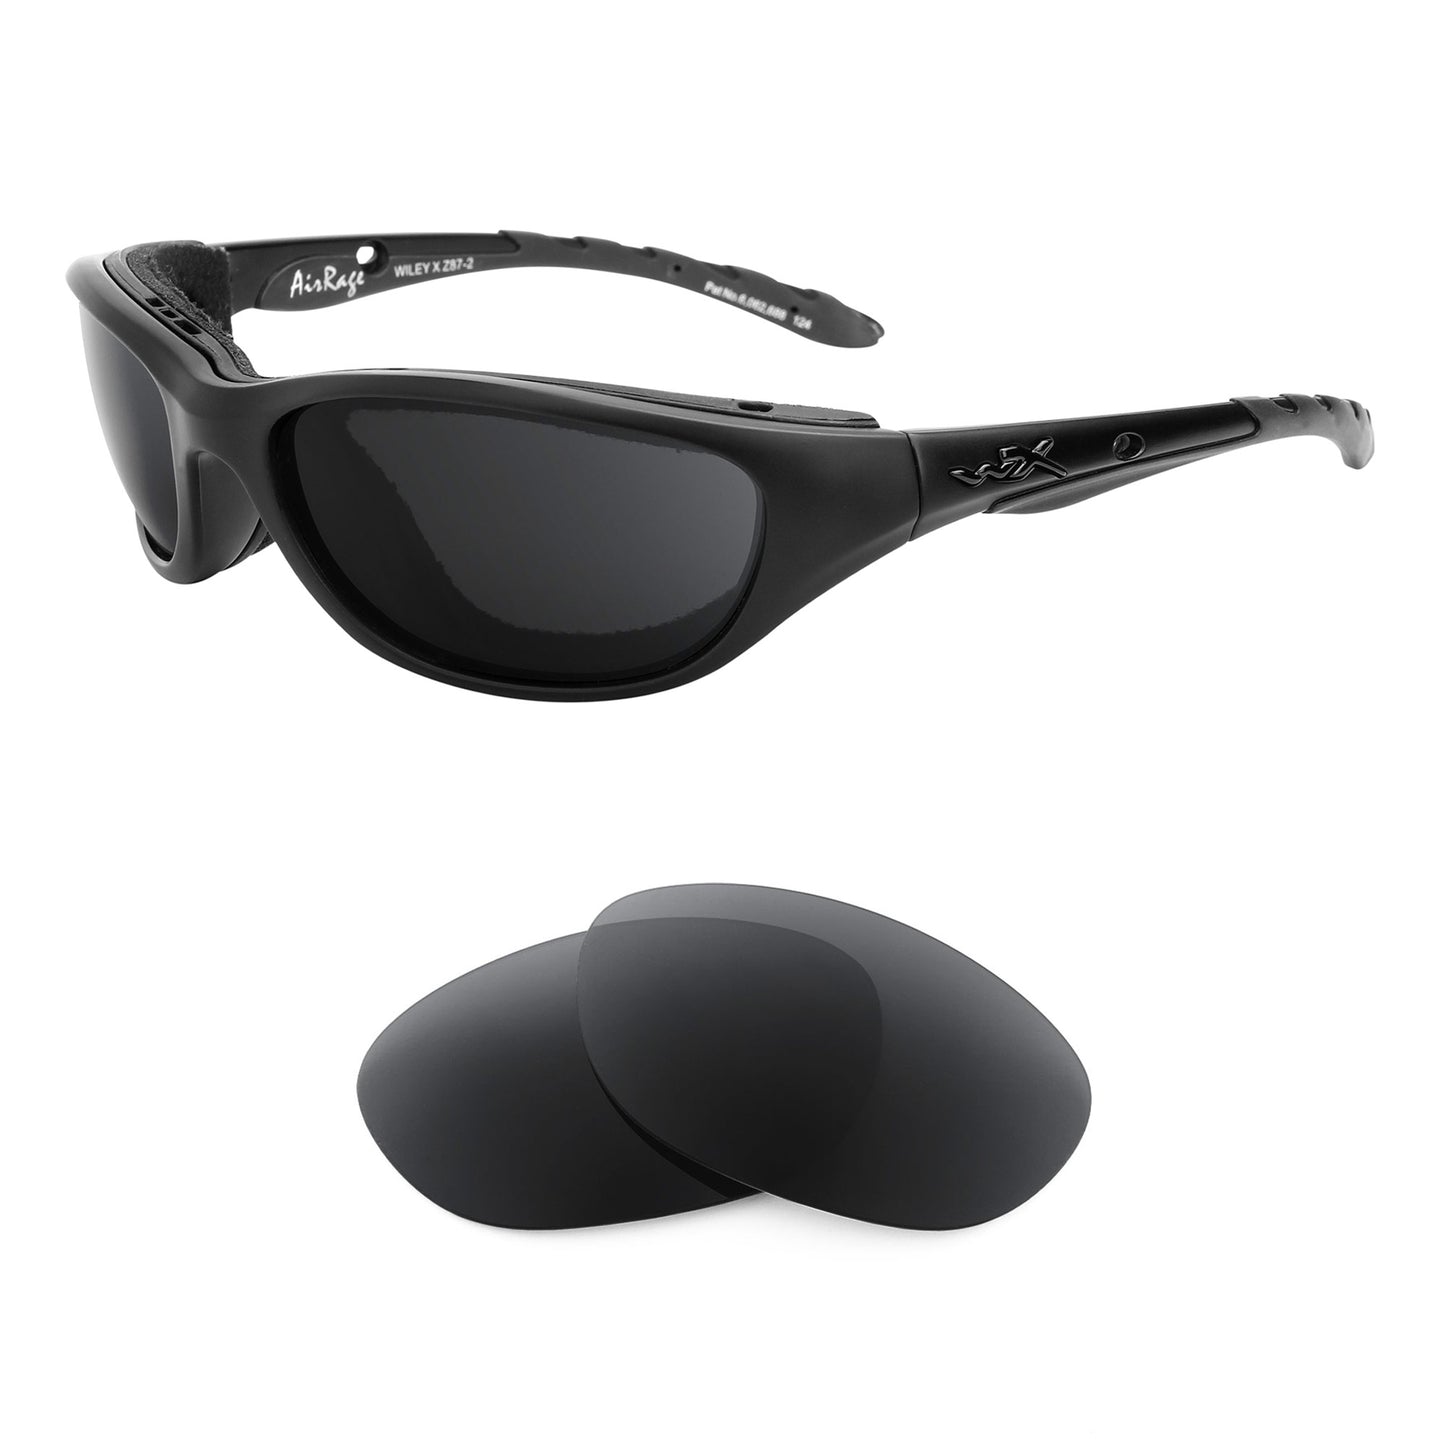 Wiley X Airrage sunglasses with replacement lenses